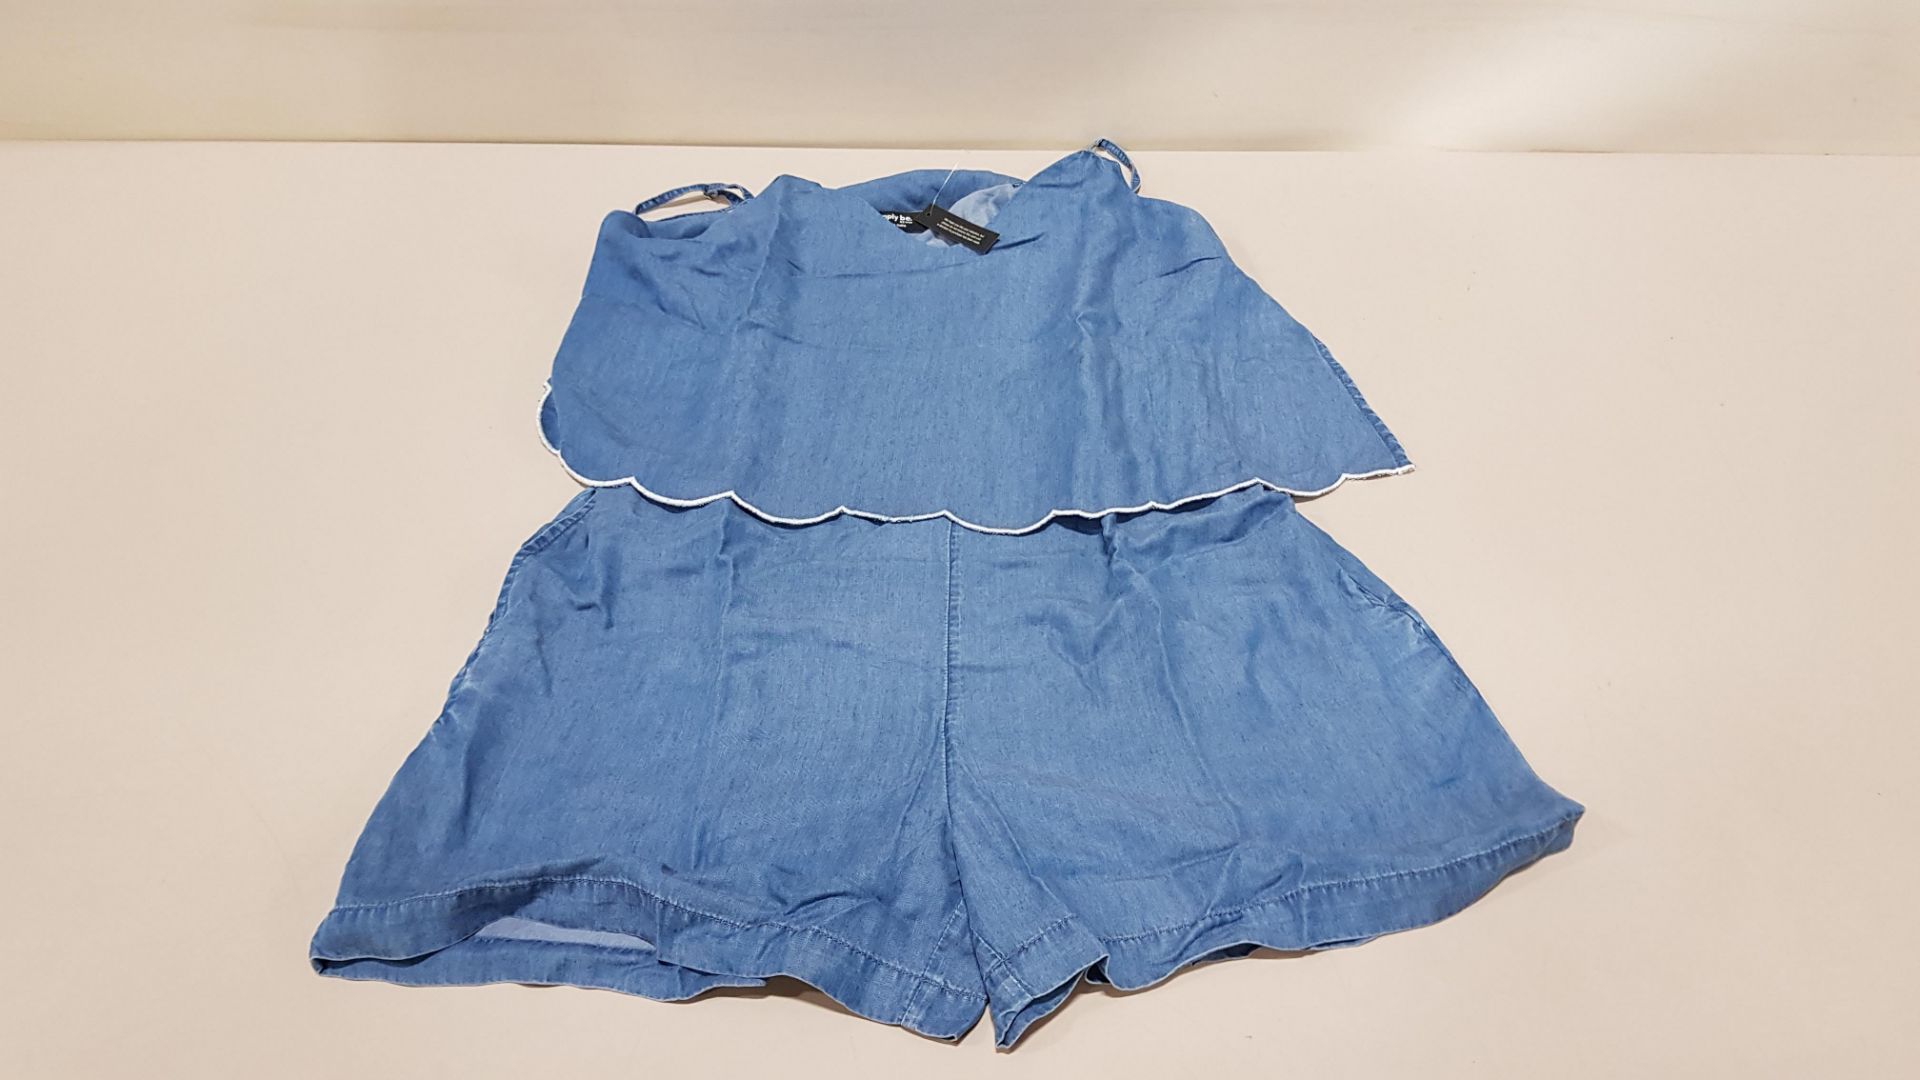 20 X BRAND NEW SIMPLY BE DENIM TENCEL PLAYSUITS IN MID BLUE IN VARIOUS SIZES (ORIG RRP £30 TOTAL £